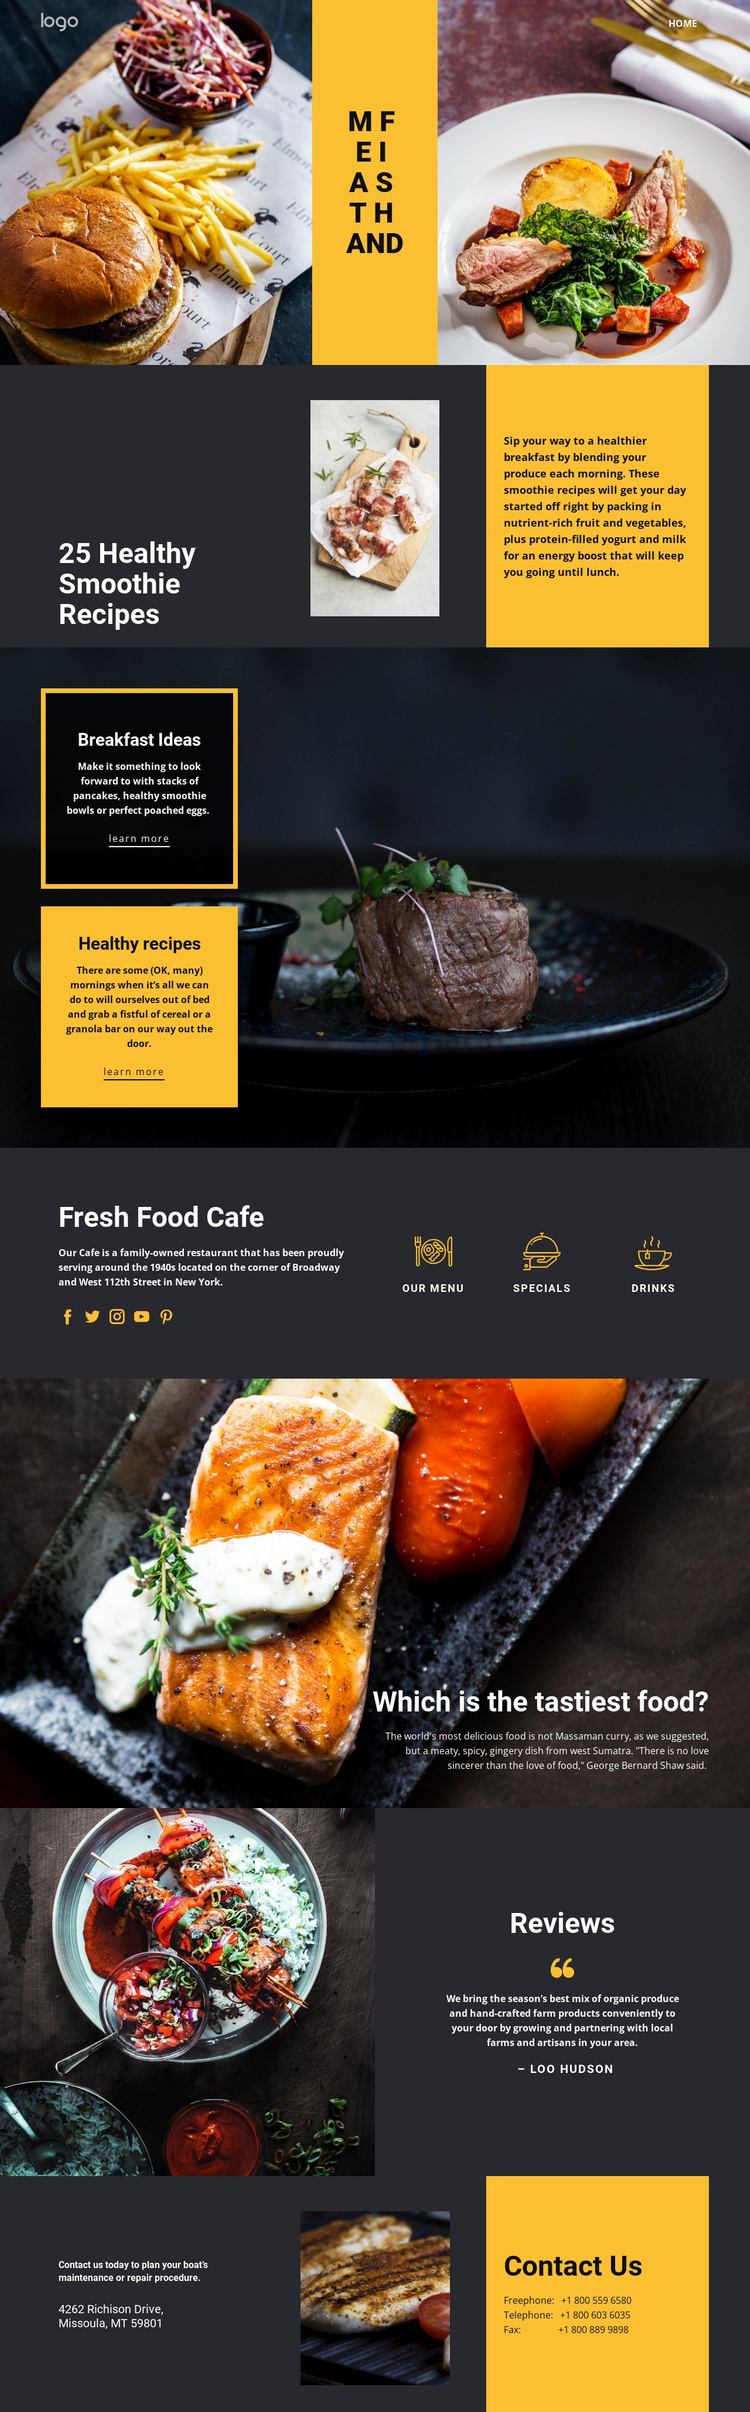 Website Template Preview 64449 